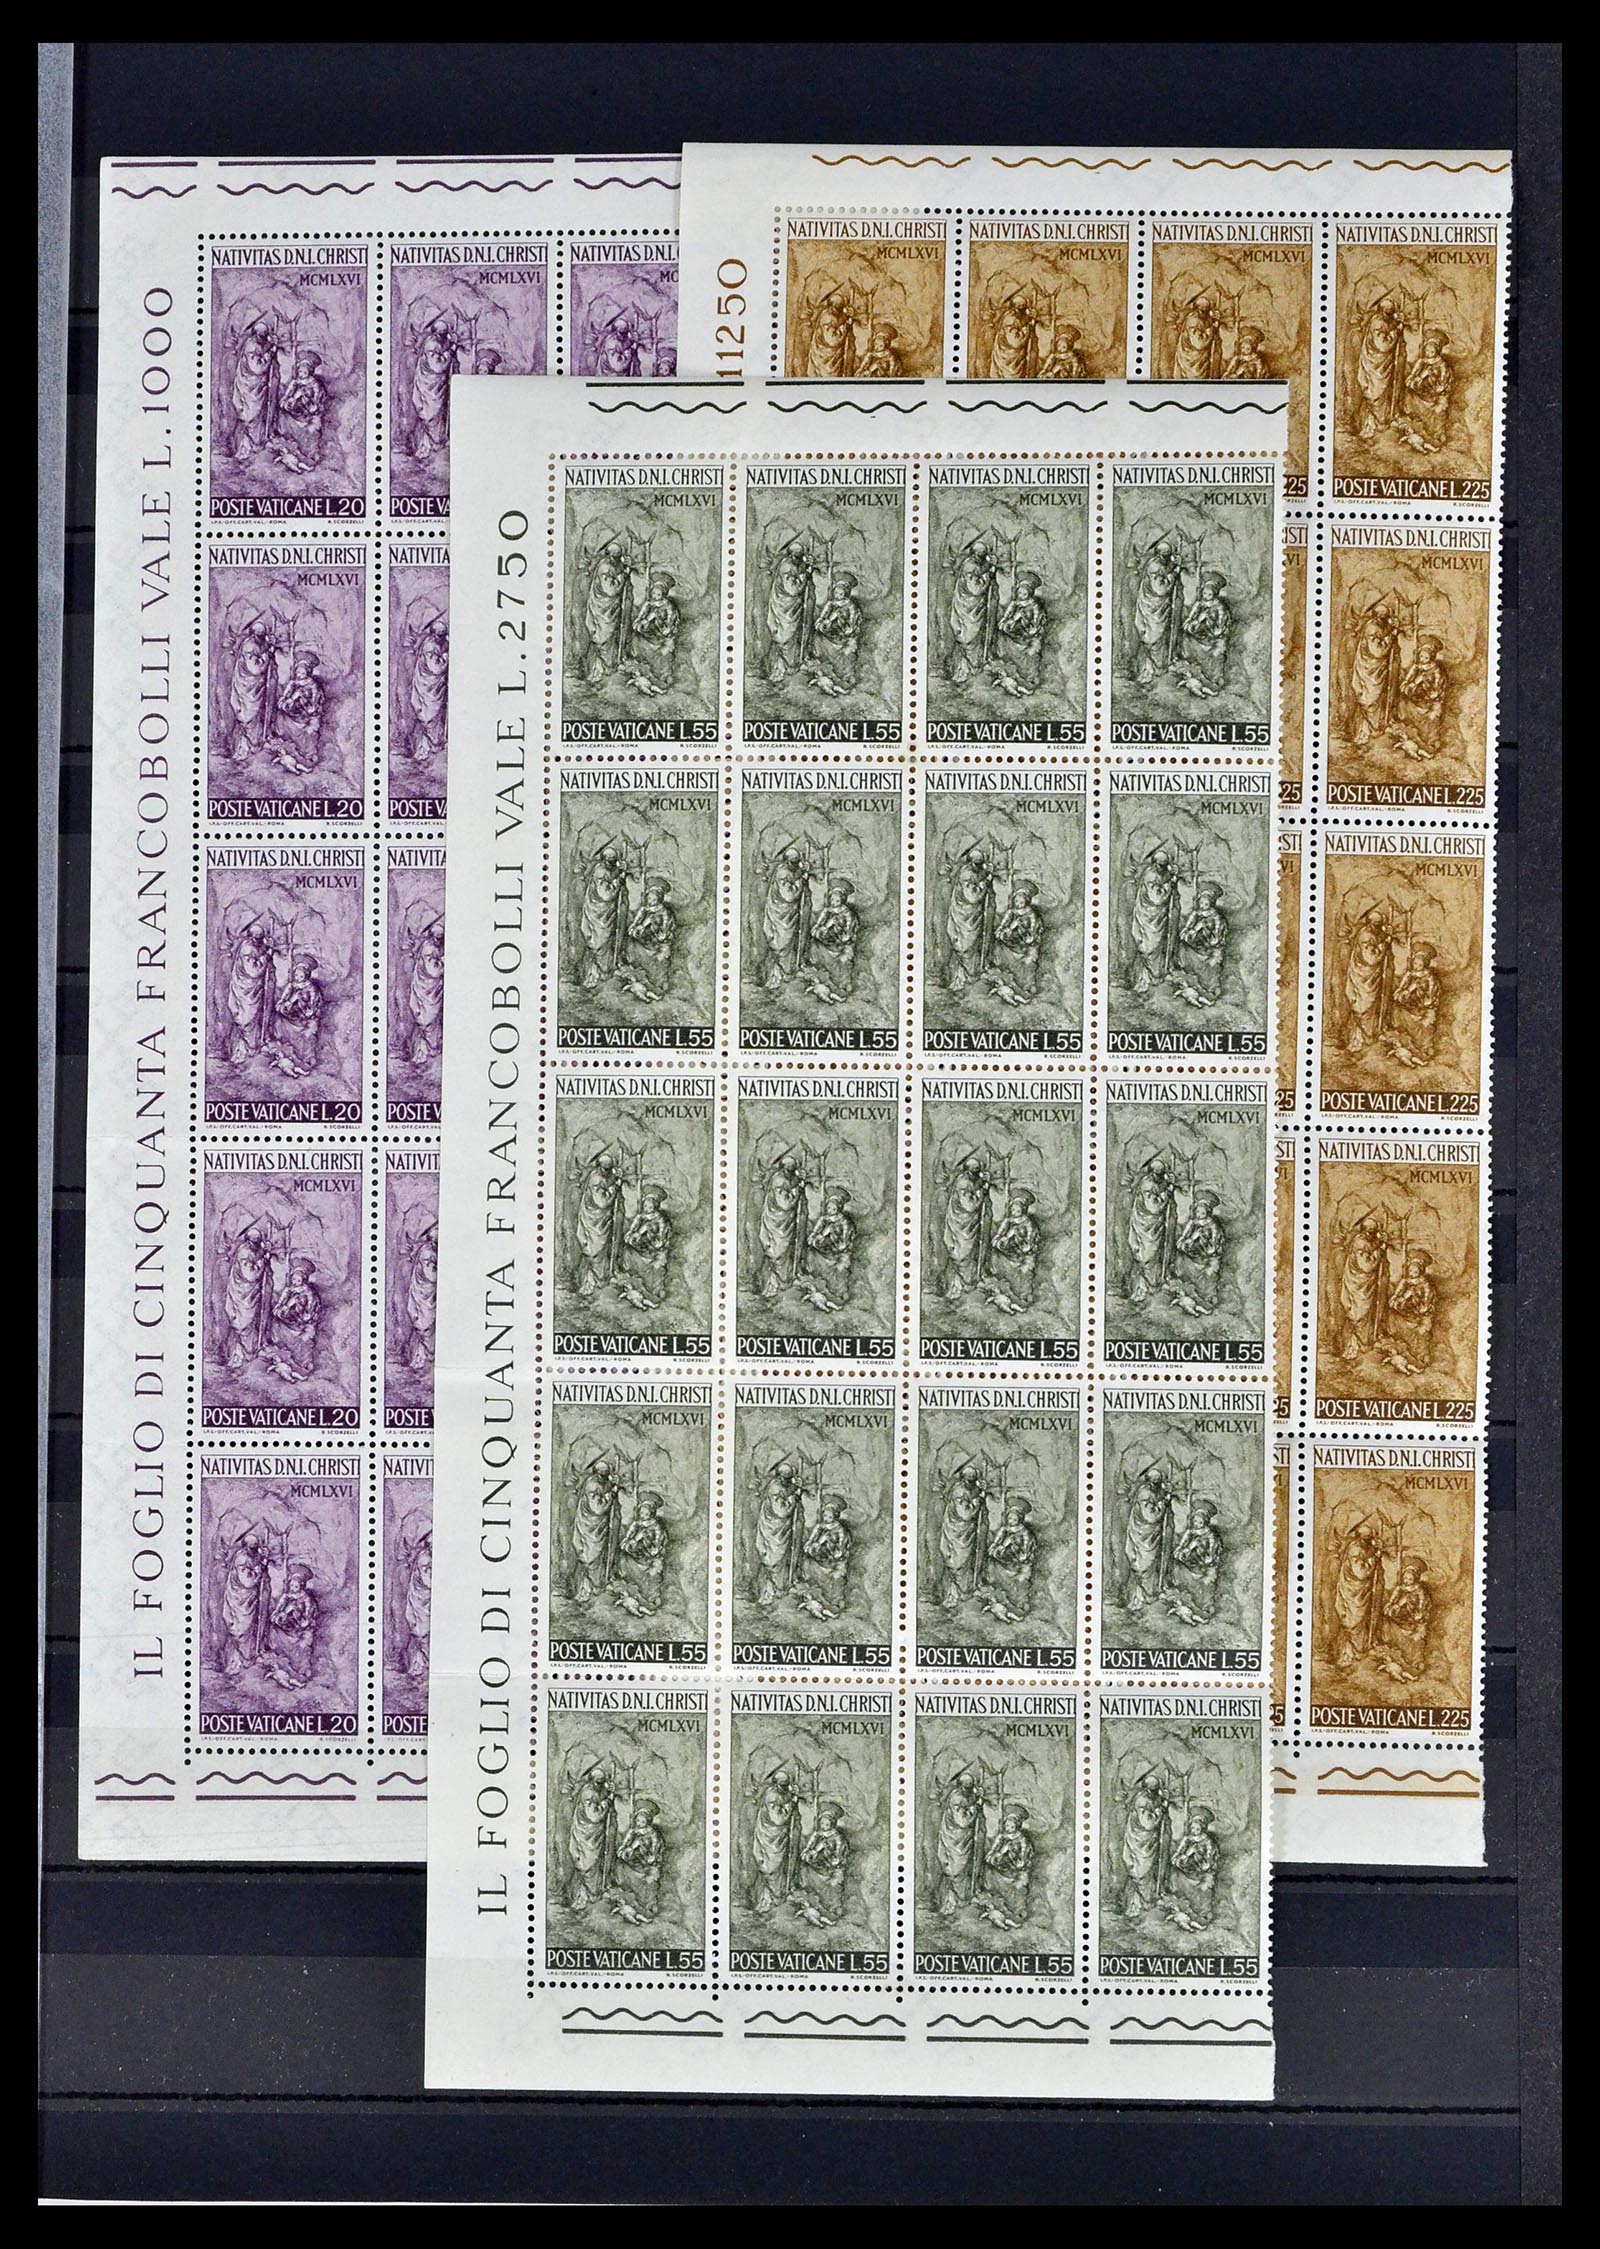 39236 0021 - Stamp collection 39236 European countries 40s-60s.